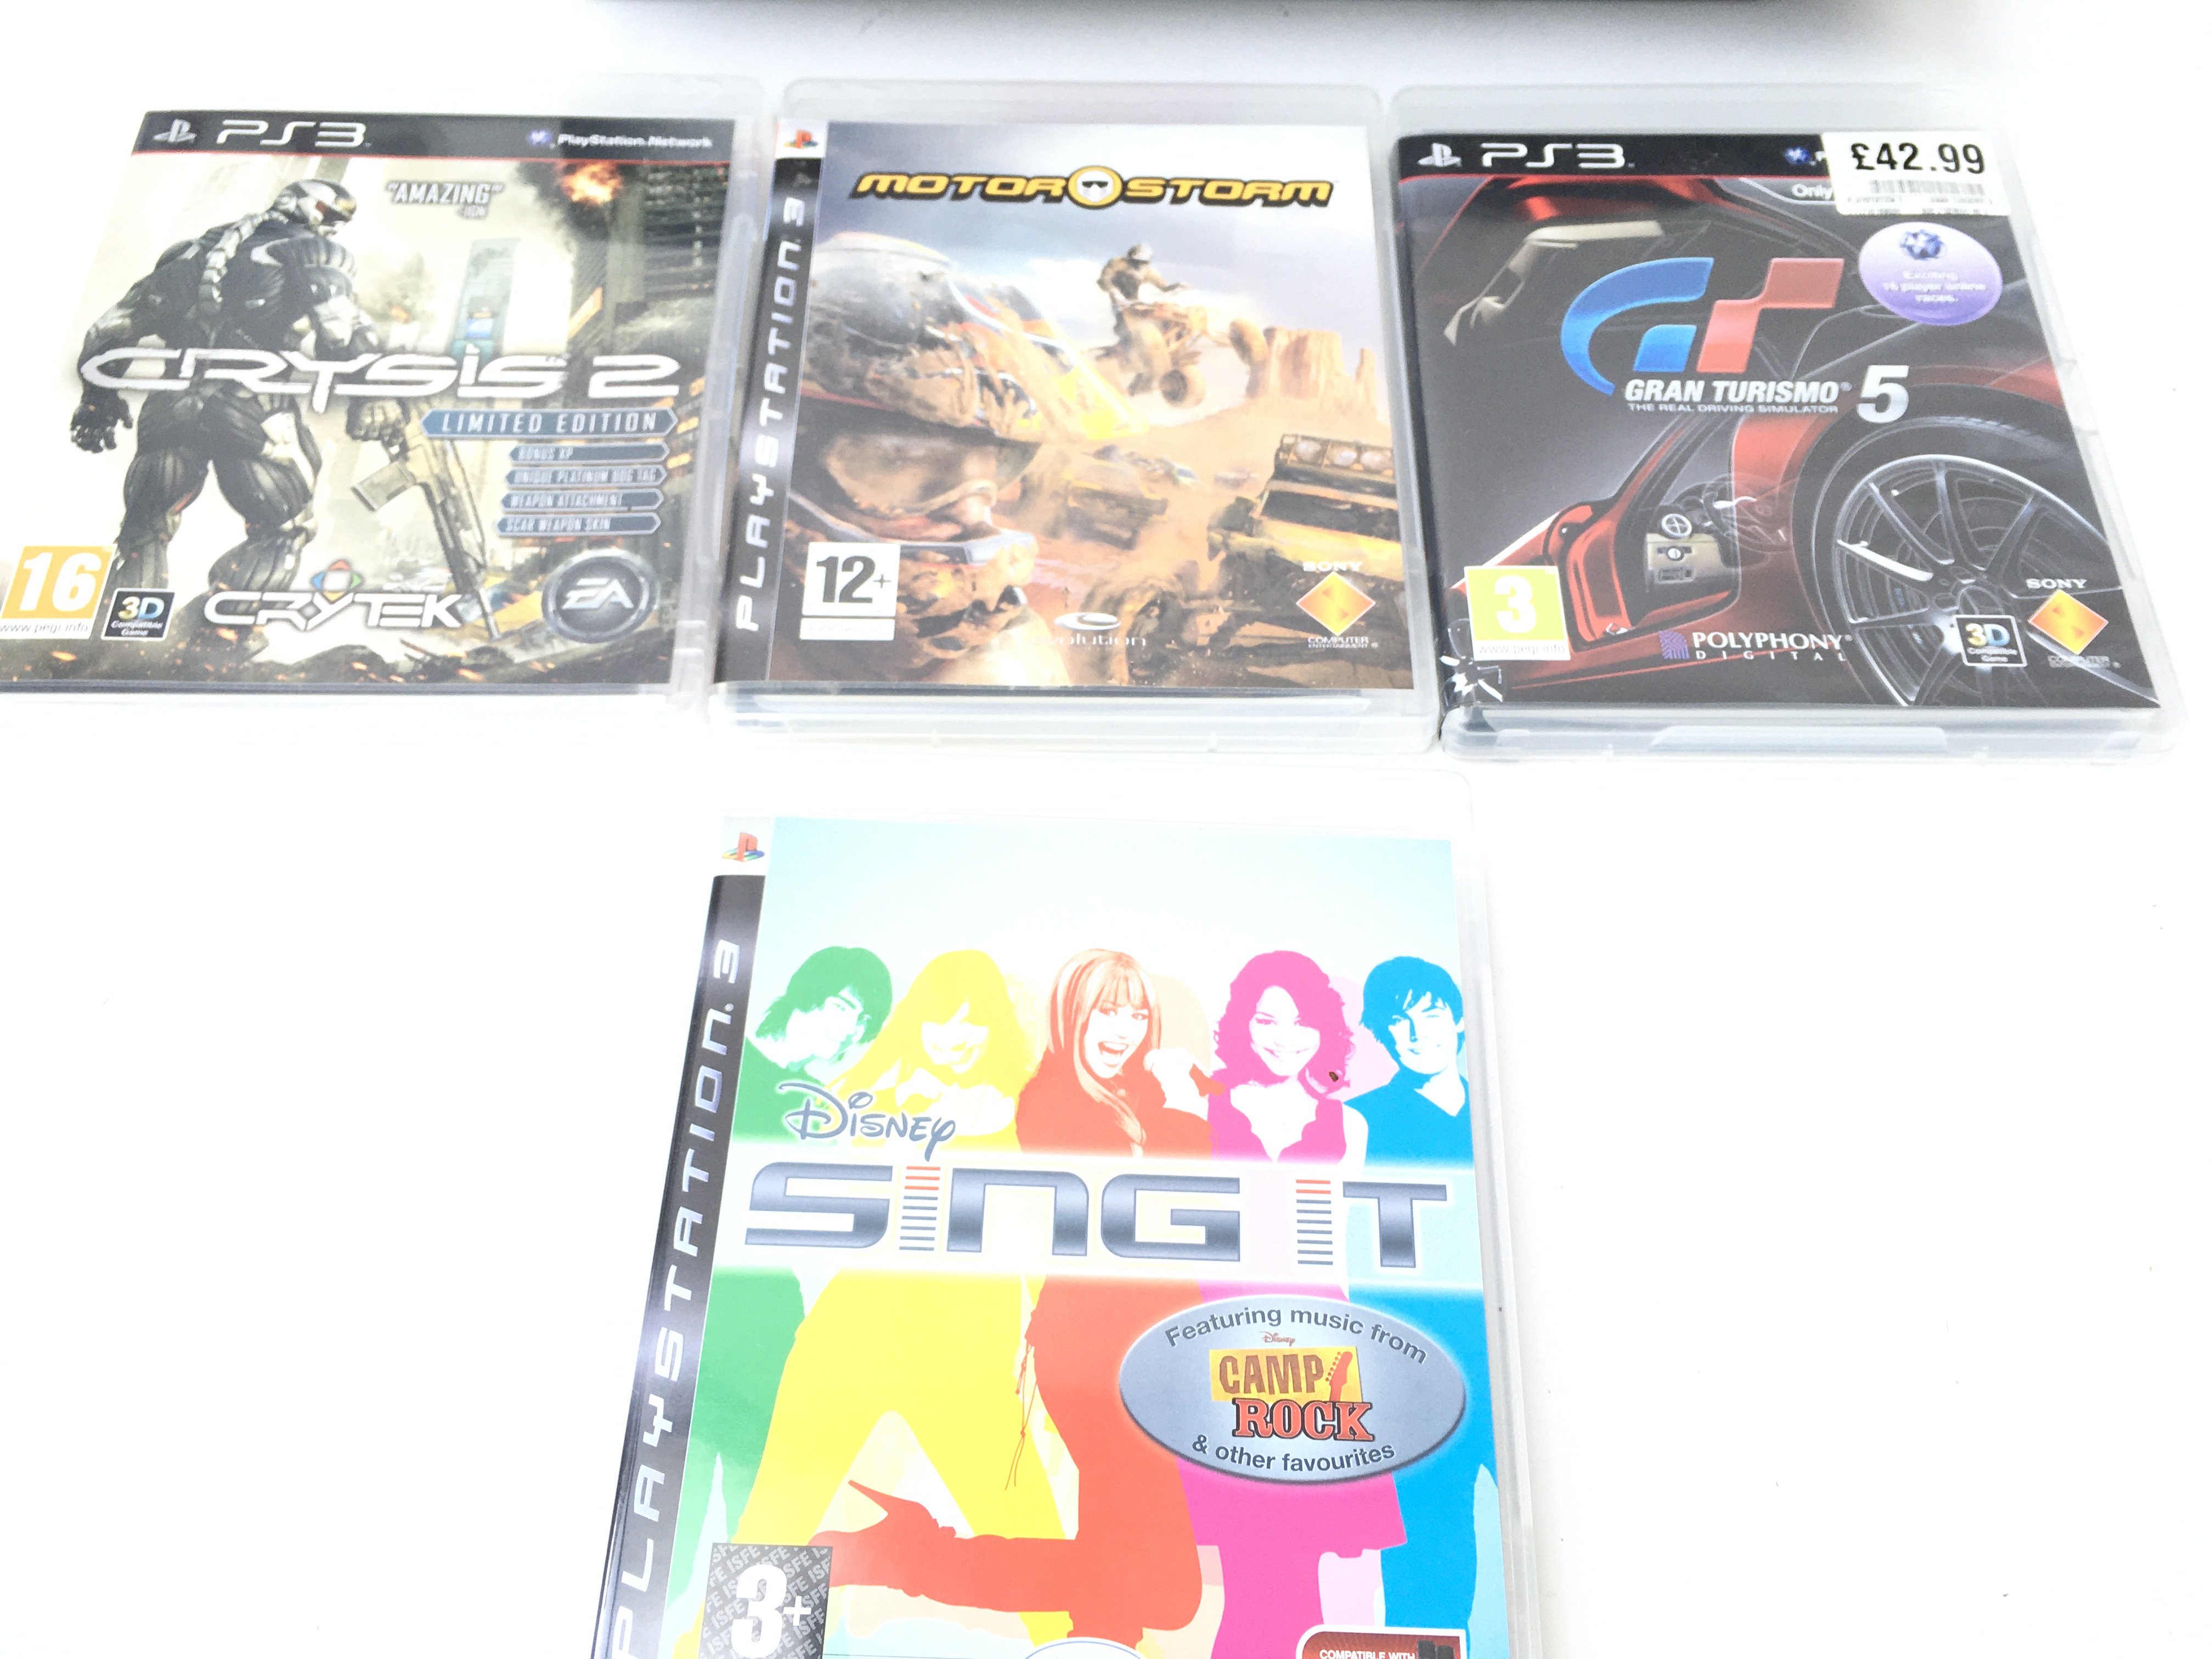 A Sony PlayStation 3 with a Collection of Games. - Image 4 of 4